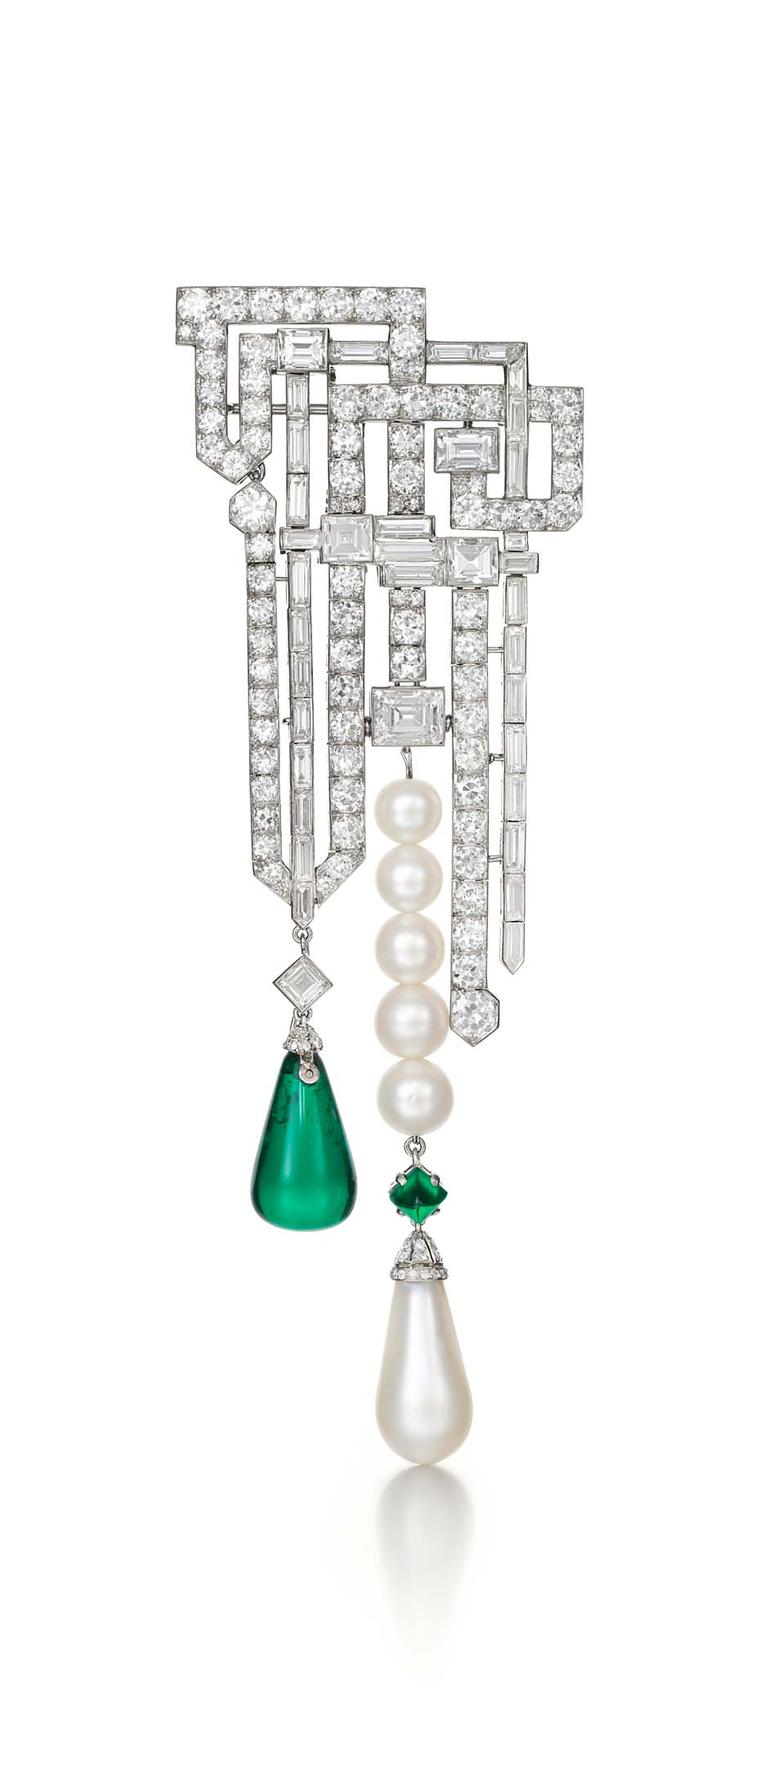 Siegelson is also exhibiting this Van Cleef & Arpels diamond, emerald and pearl brooch dating from 1926 at Masterpiece London.